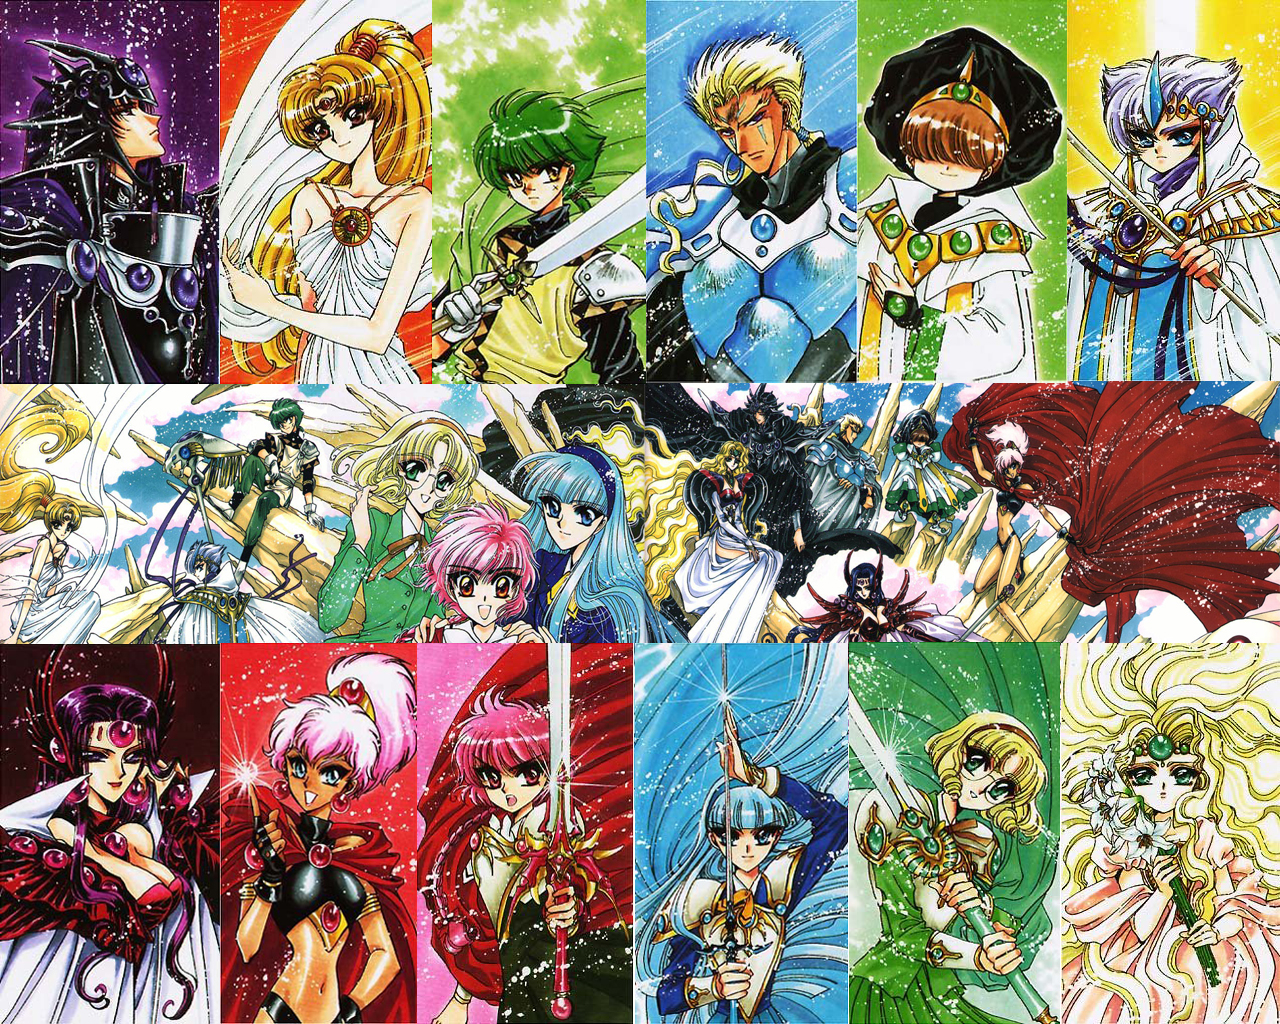 Amazing Magic Knight Rayearth Pictures & Backgrounds